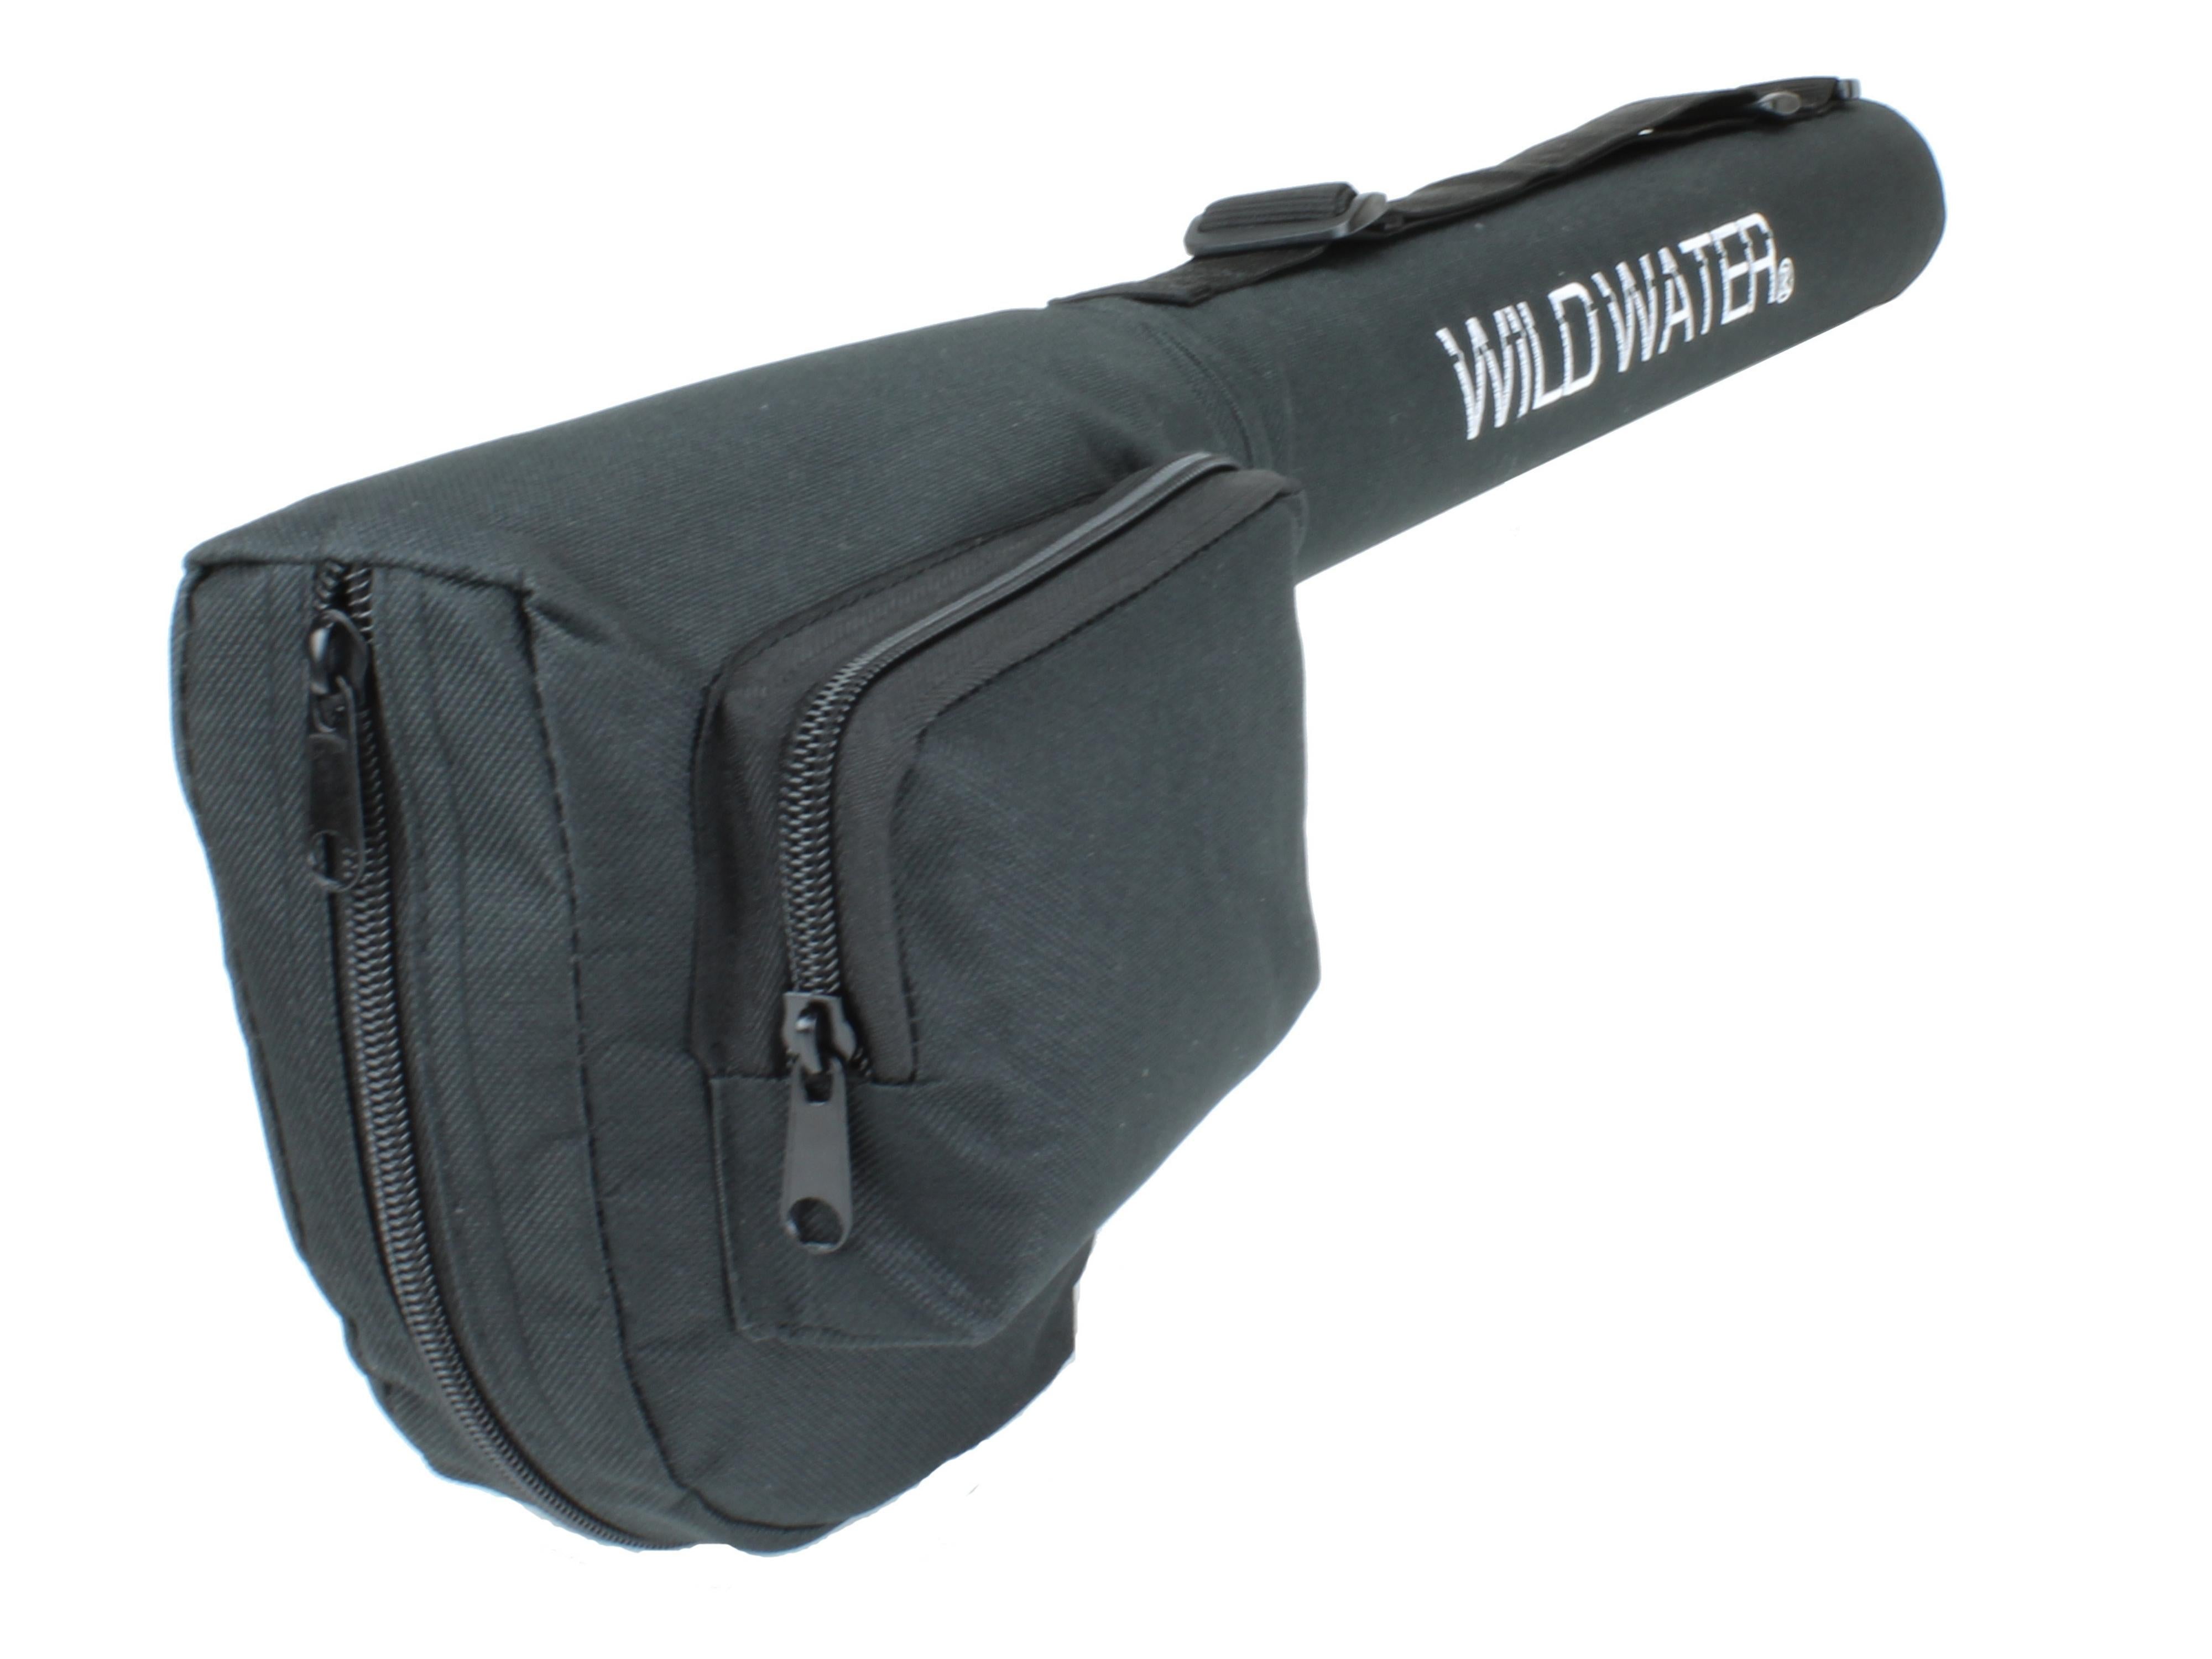 Wild Water Fly Fishing Case for Rod, Reel & Accessories (7 foot, 4